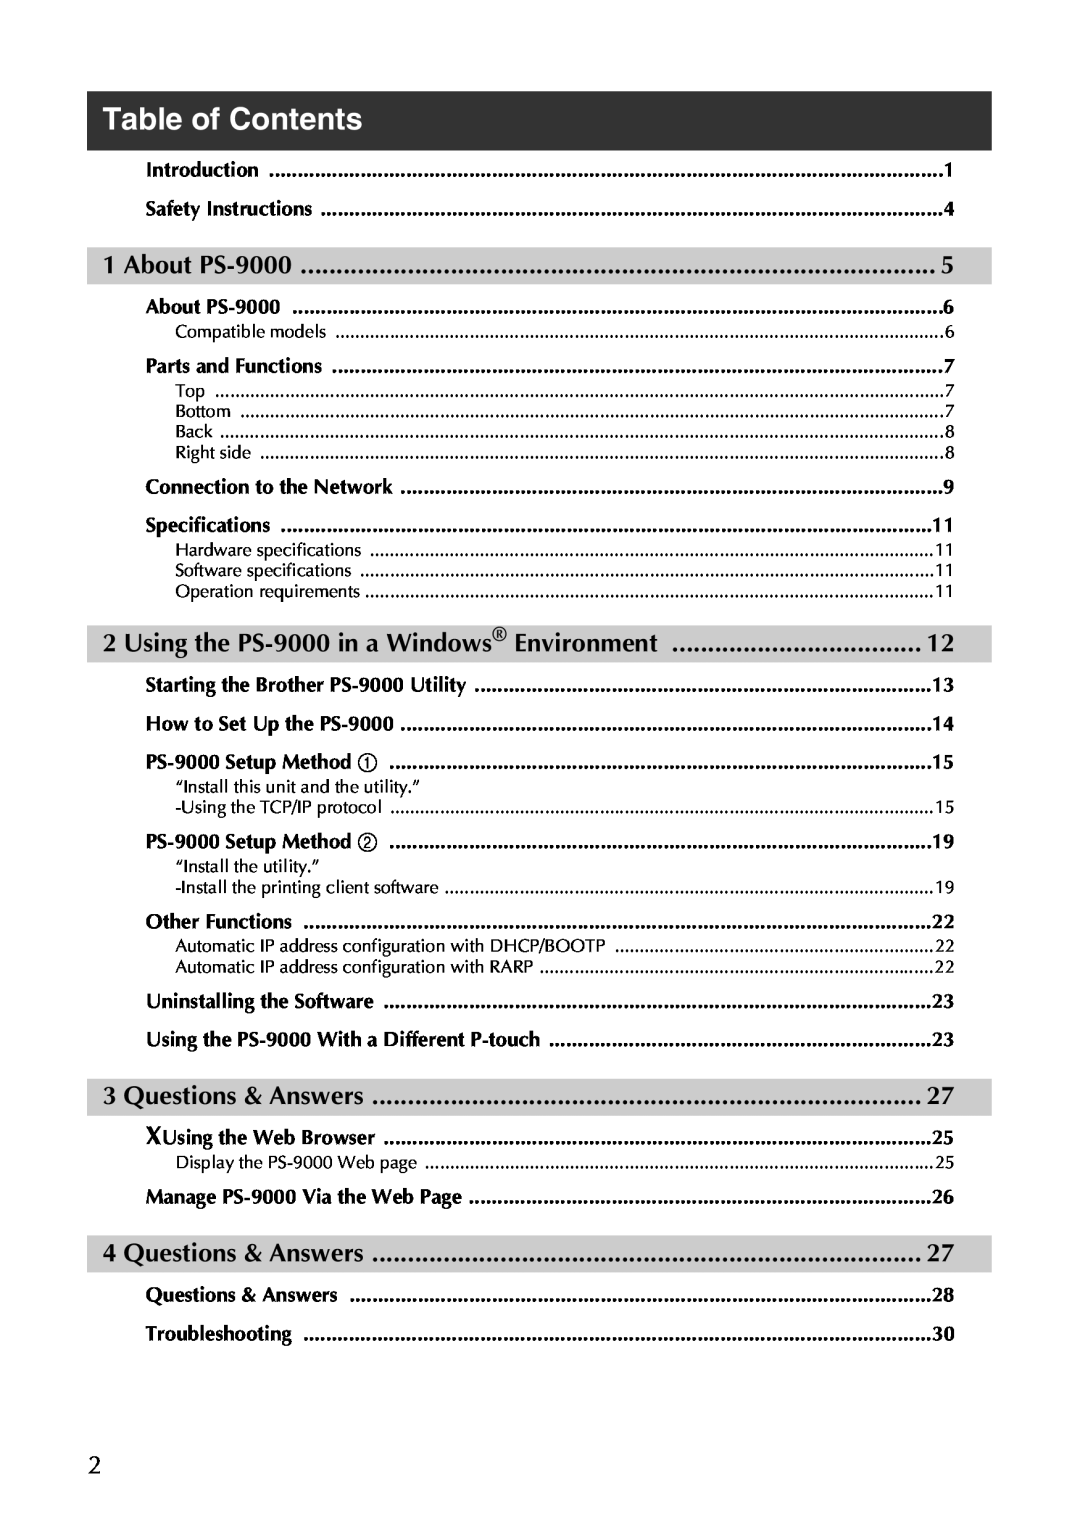 Brother user manual Table of Contents, About PS-9000, Using the PS-9000 in a Windows Environment, Questions & Answers 